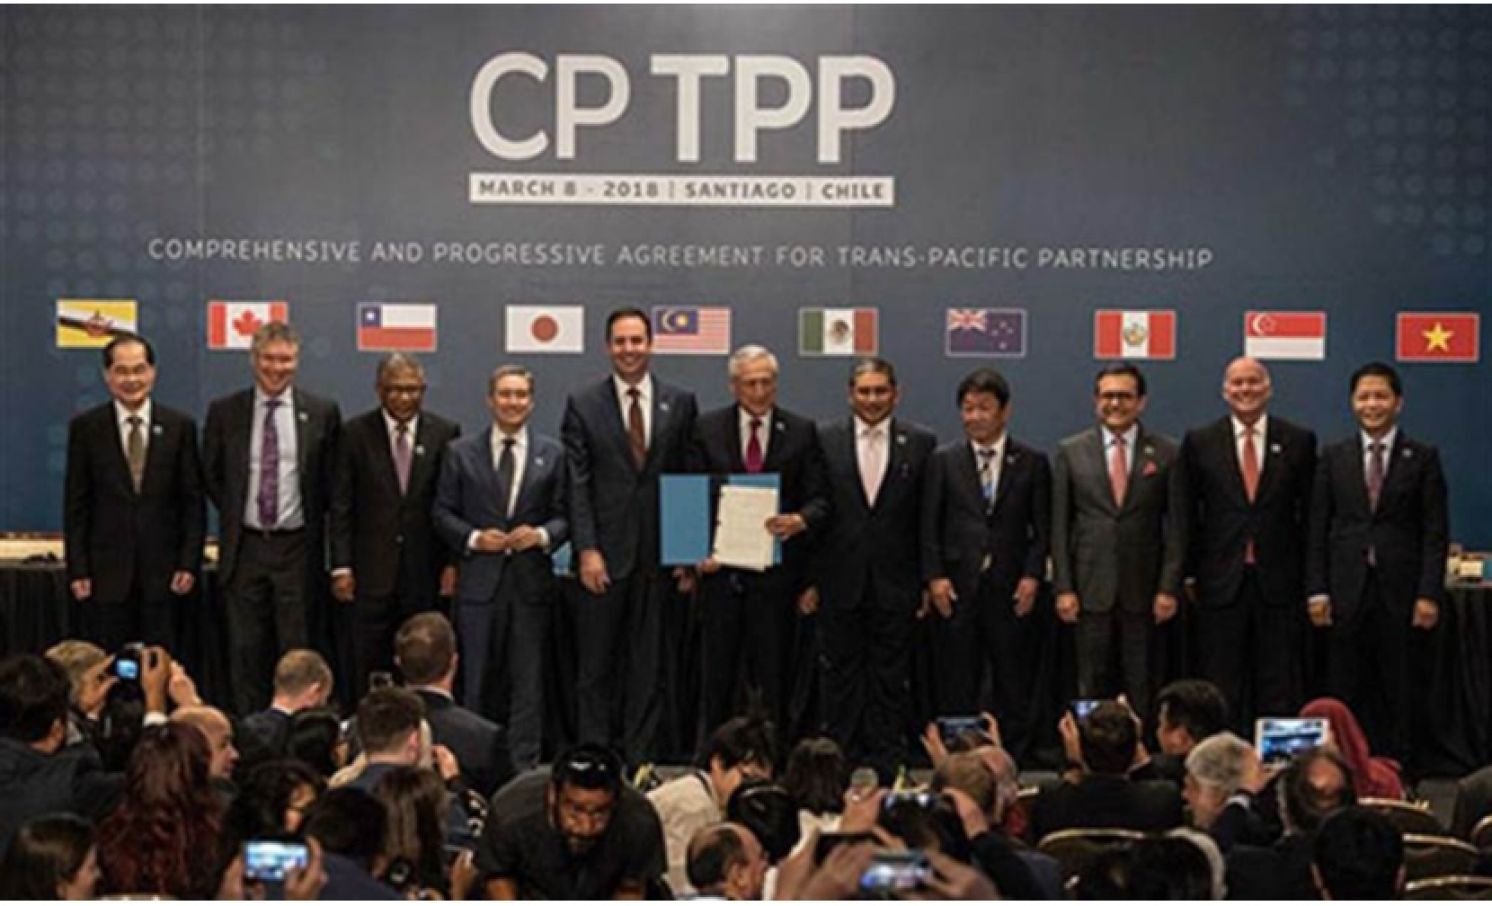 To Join CPTPP, Taiwan Has Three Major Openings to Tackle